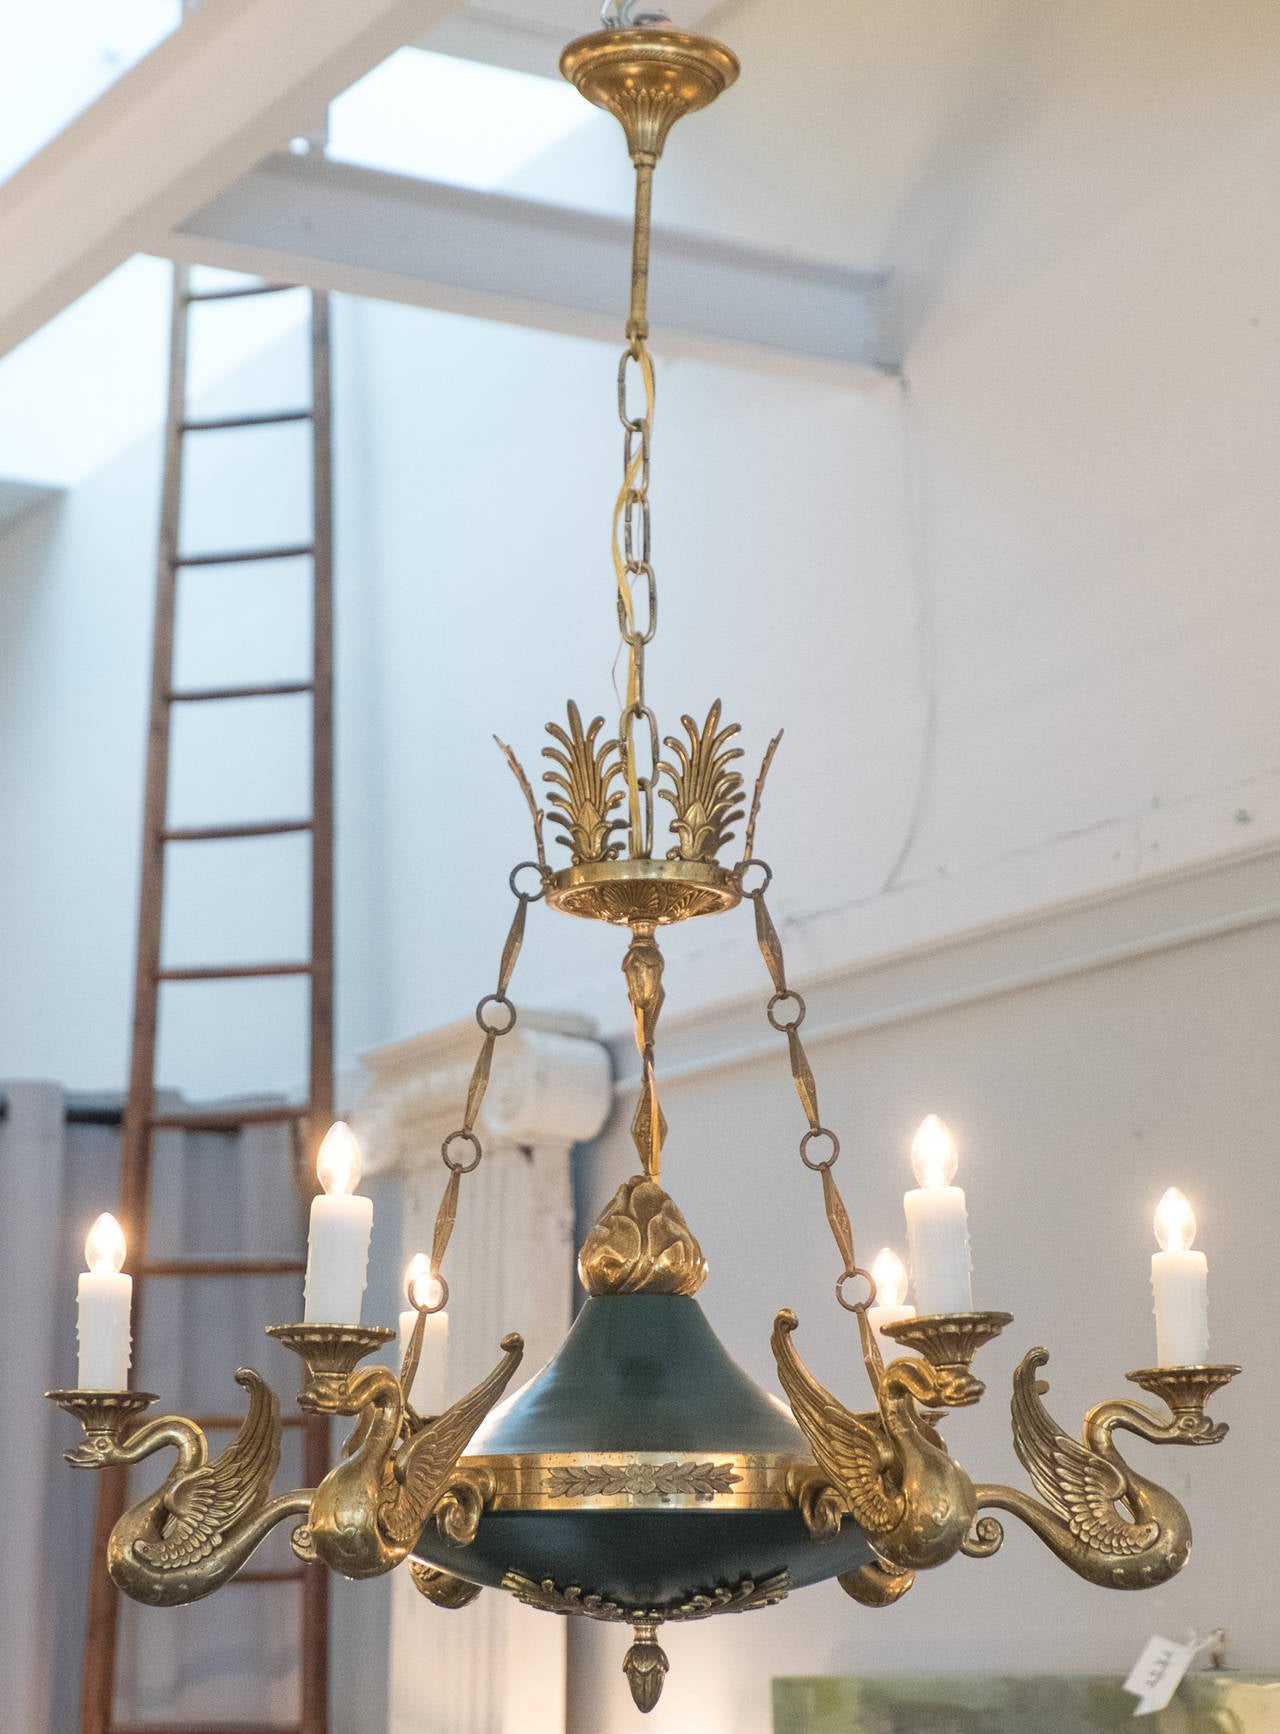 Rare French Empire style gilt bronze and (dark green) tole chandelier with six branches featuring flying swans details, floral and acorn cast details, and matching canopy with decorative chain. The quality of the castings and ormolu are simply